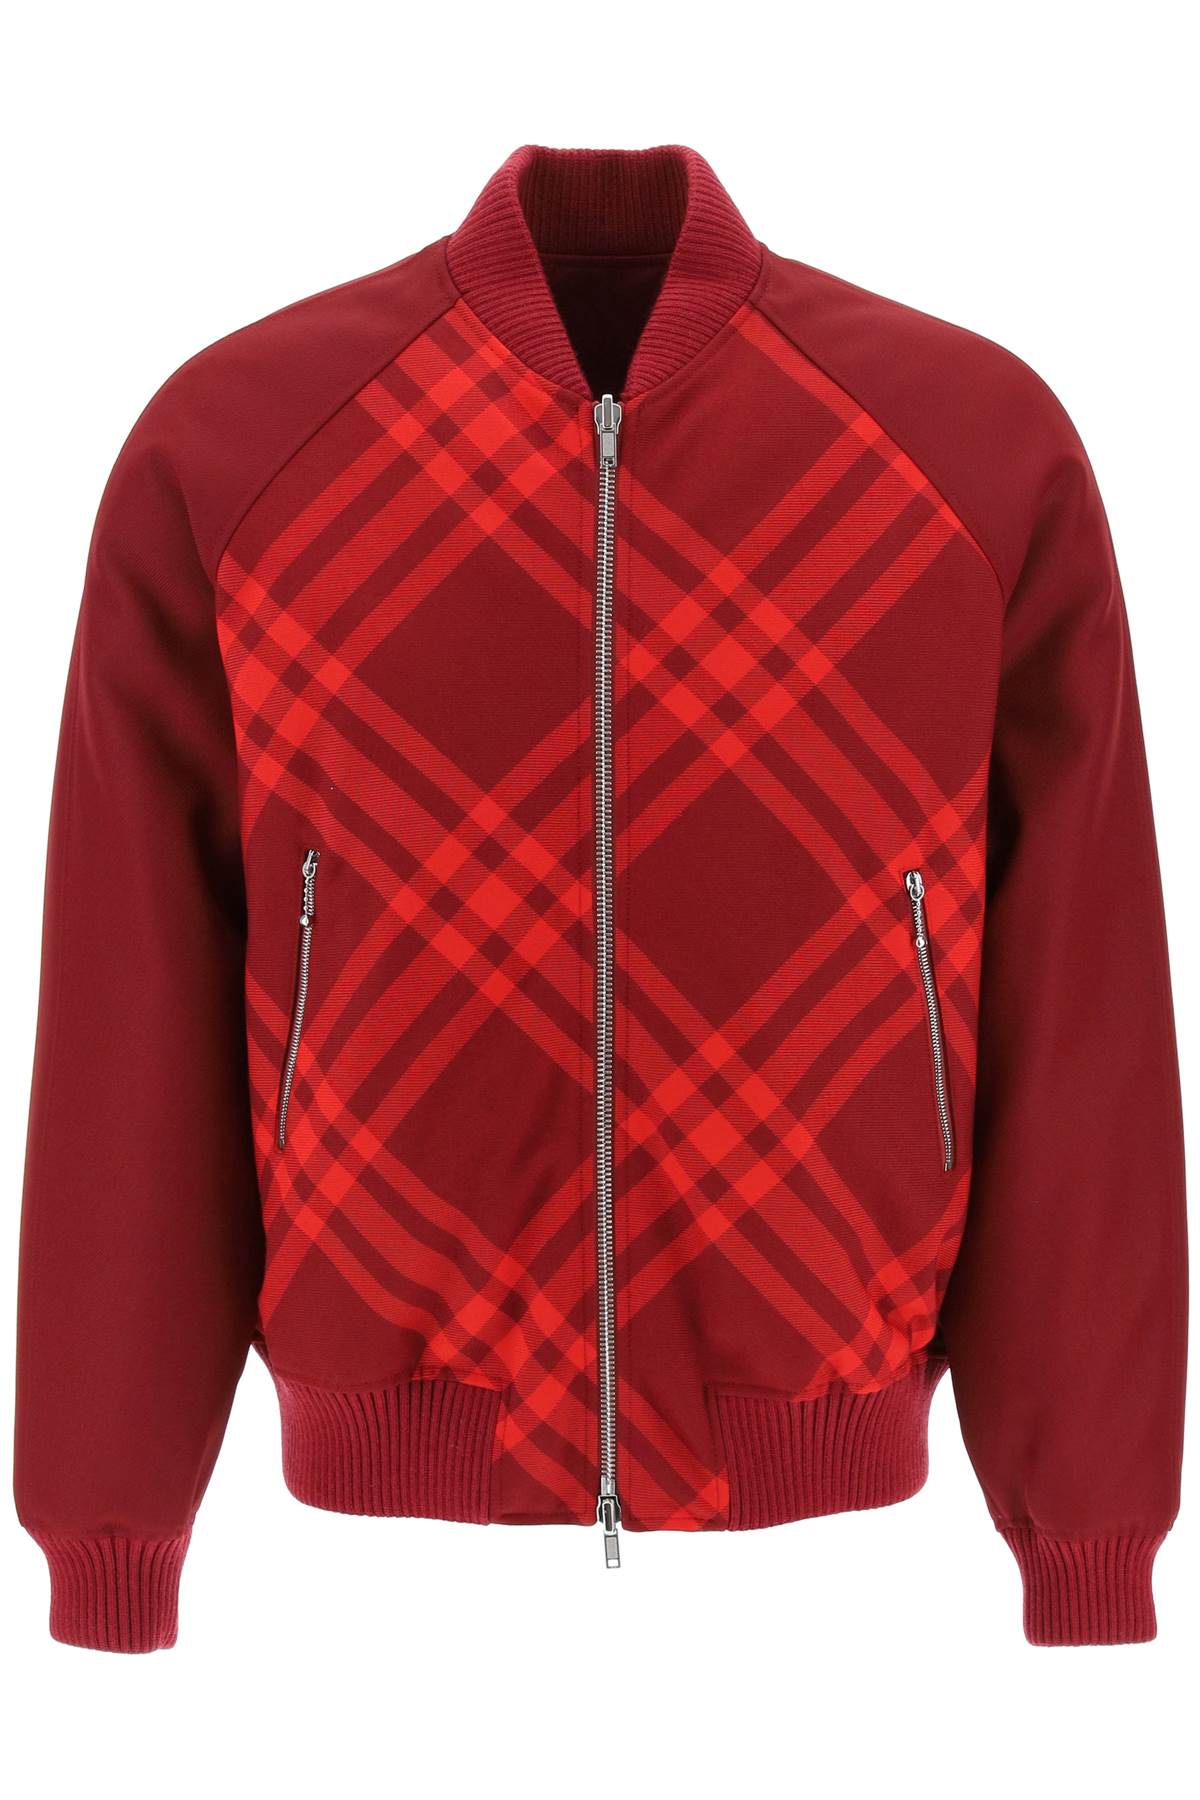 Burberry check reversible bomber jacket 8078906 RIPPLE IP CHECK